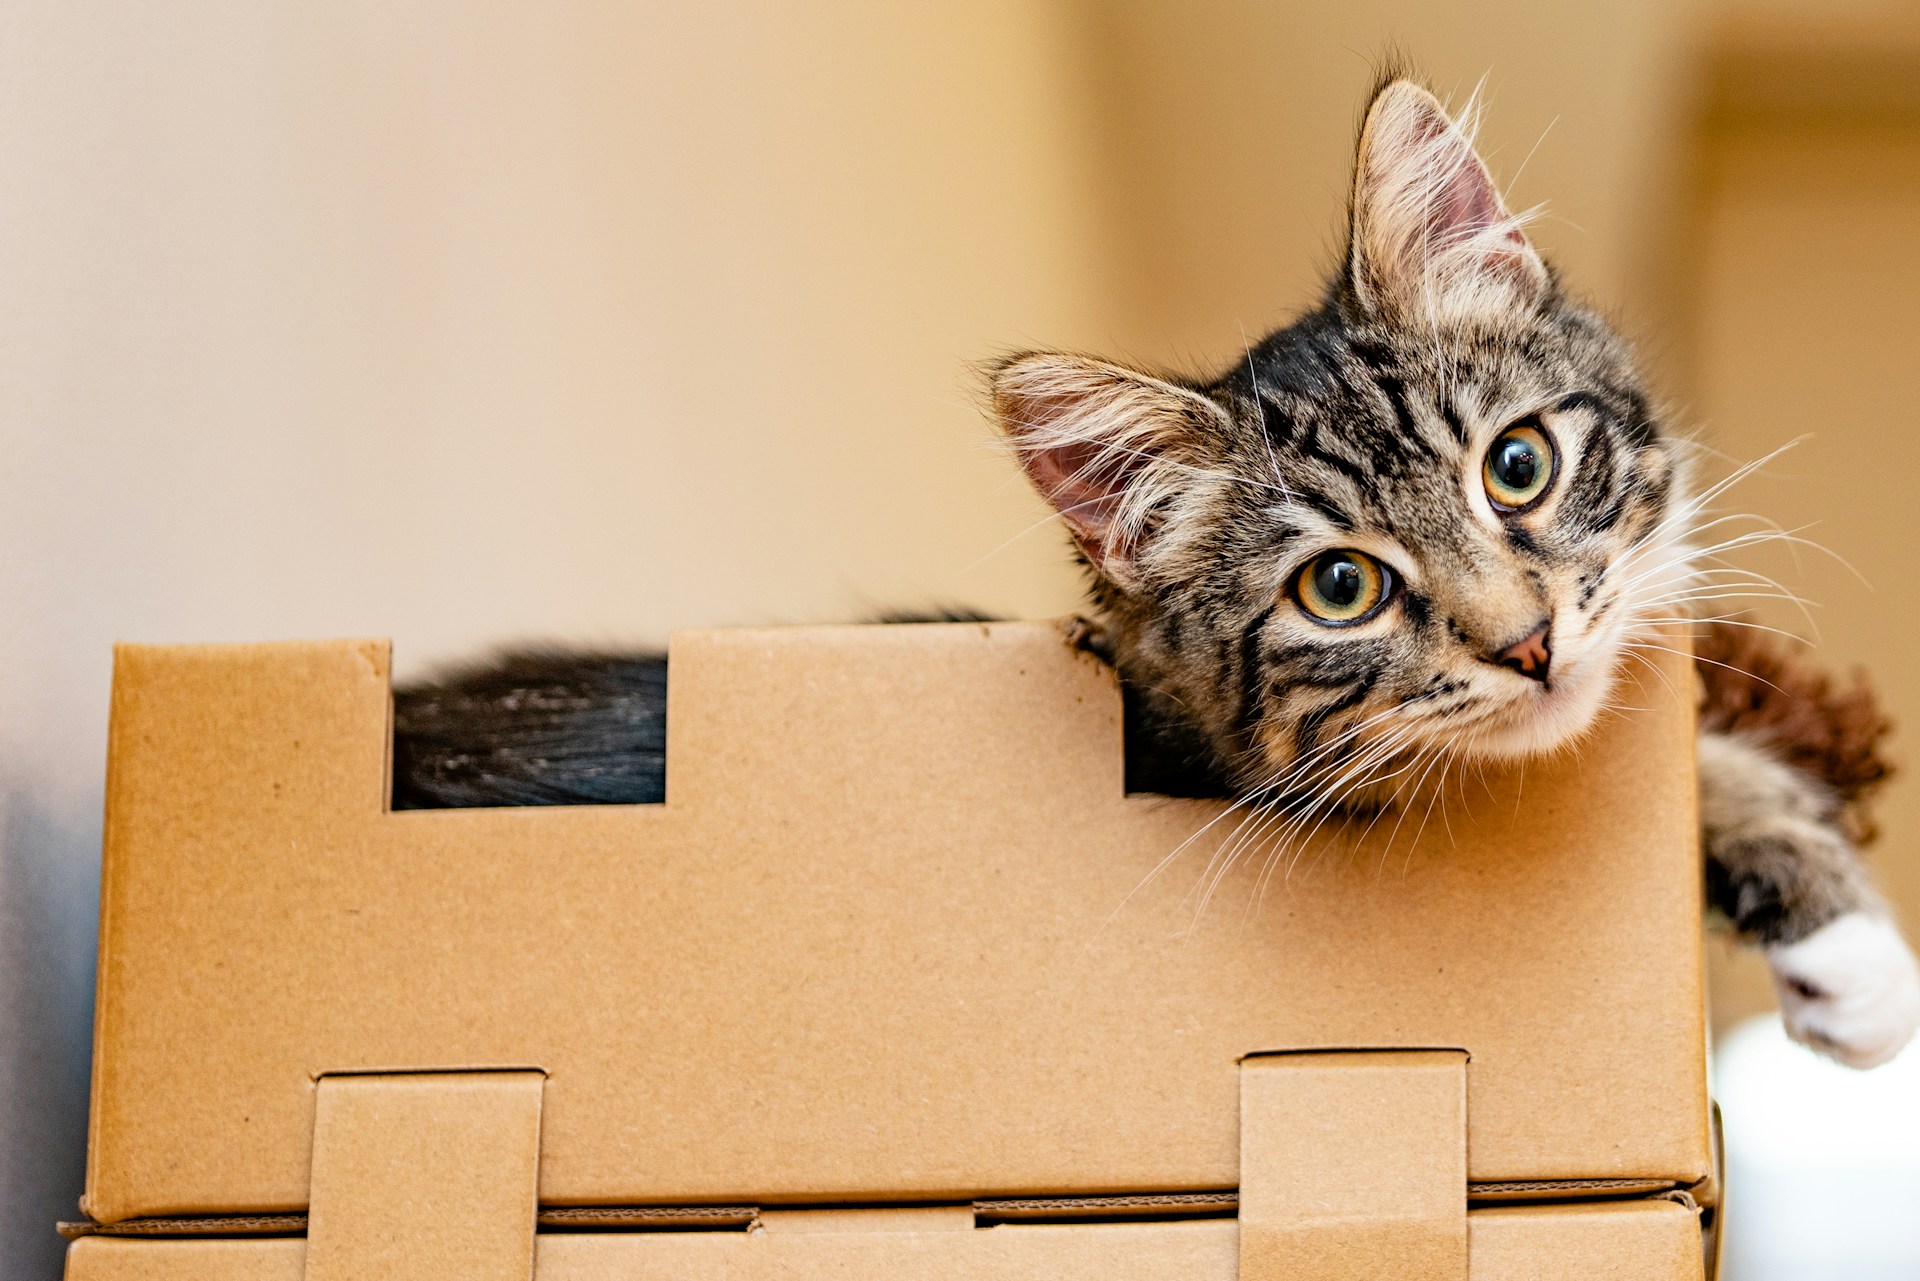 Background image of a cat in a cardboard box